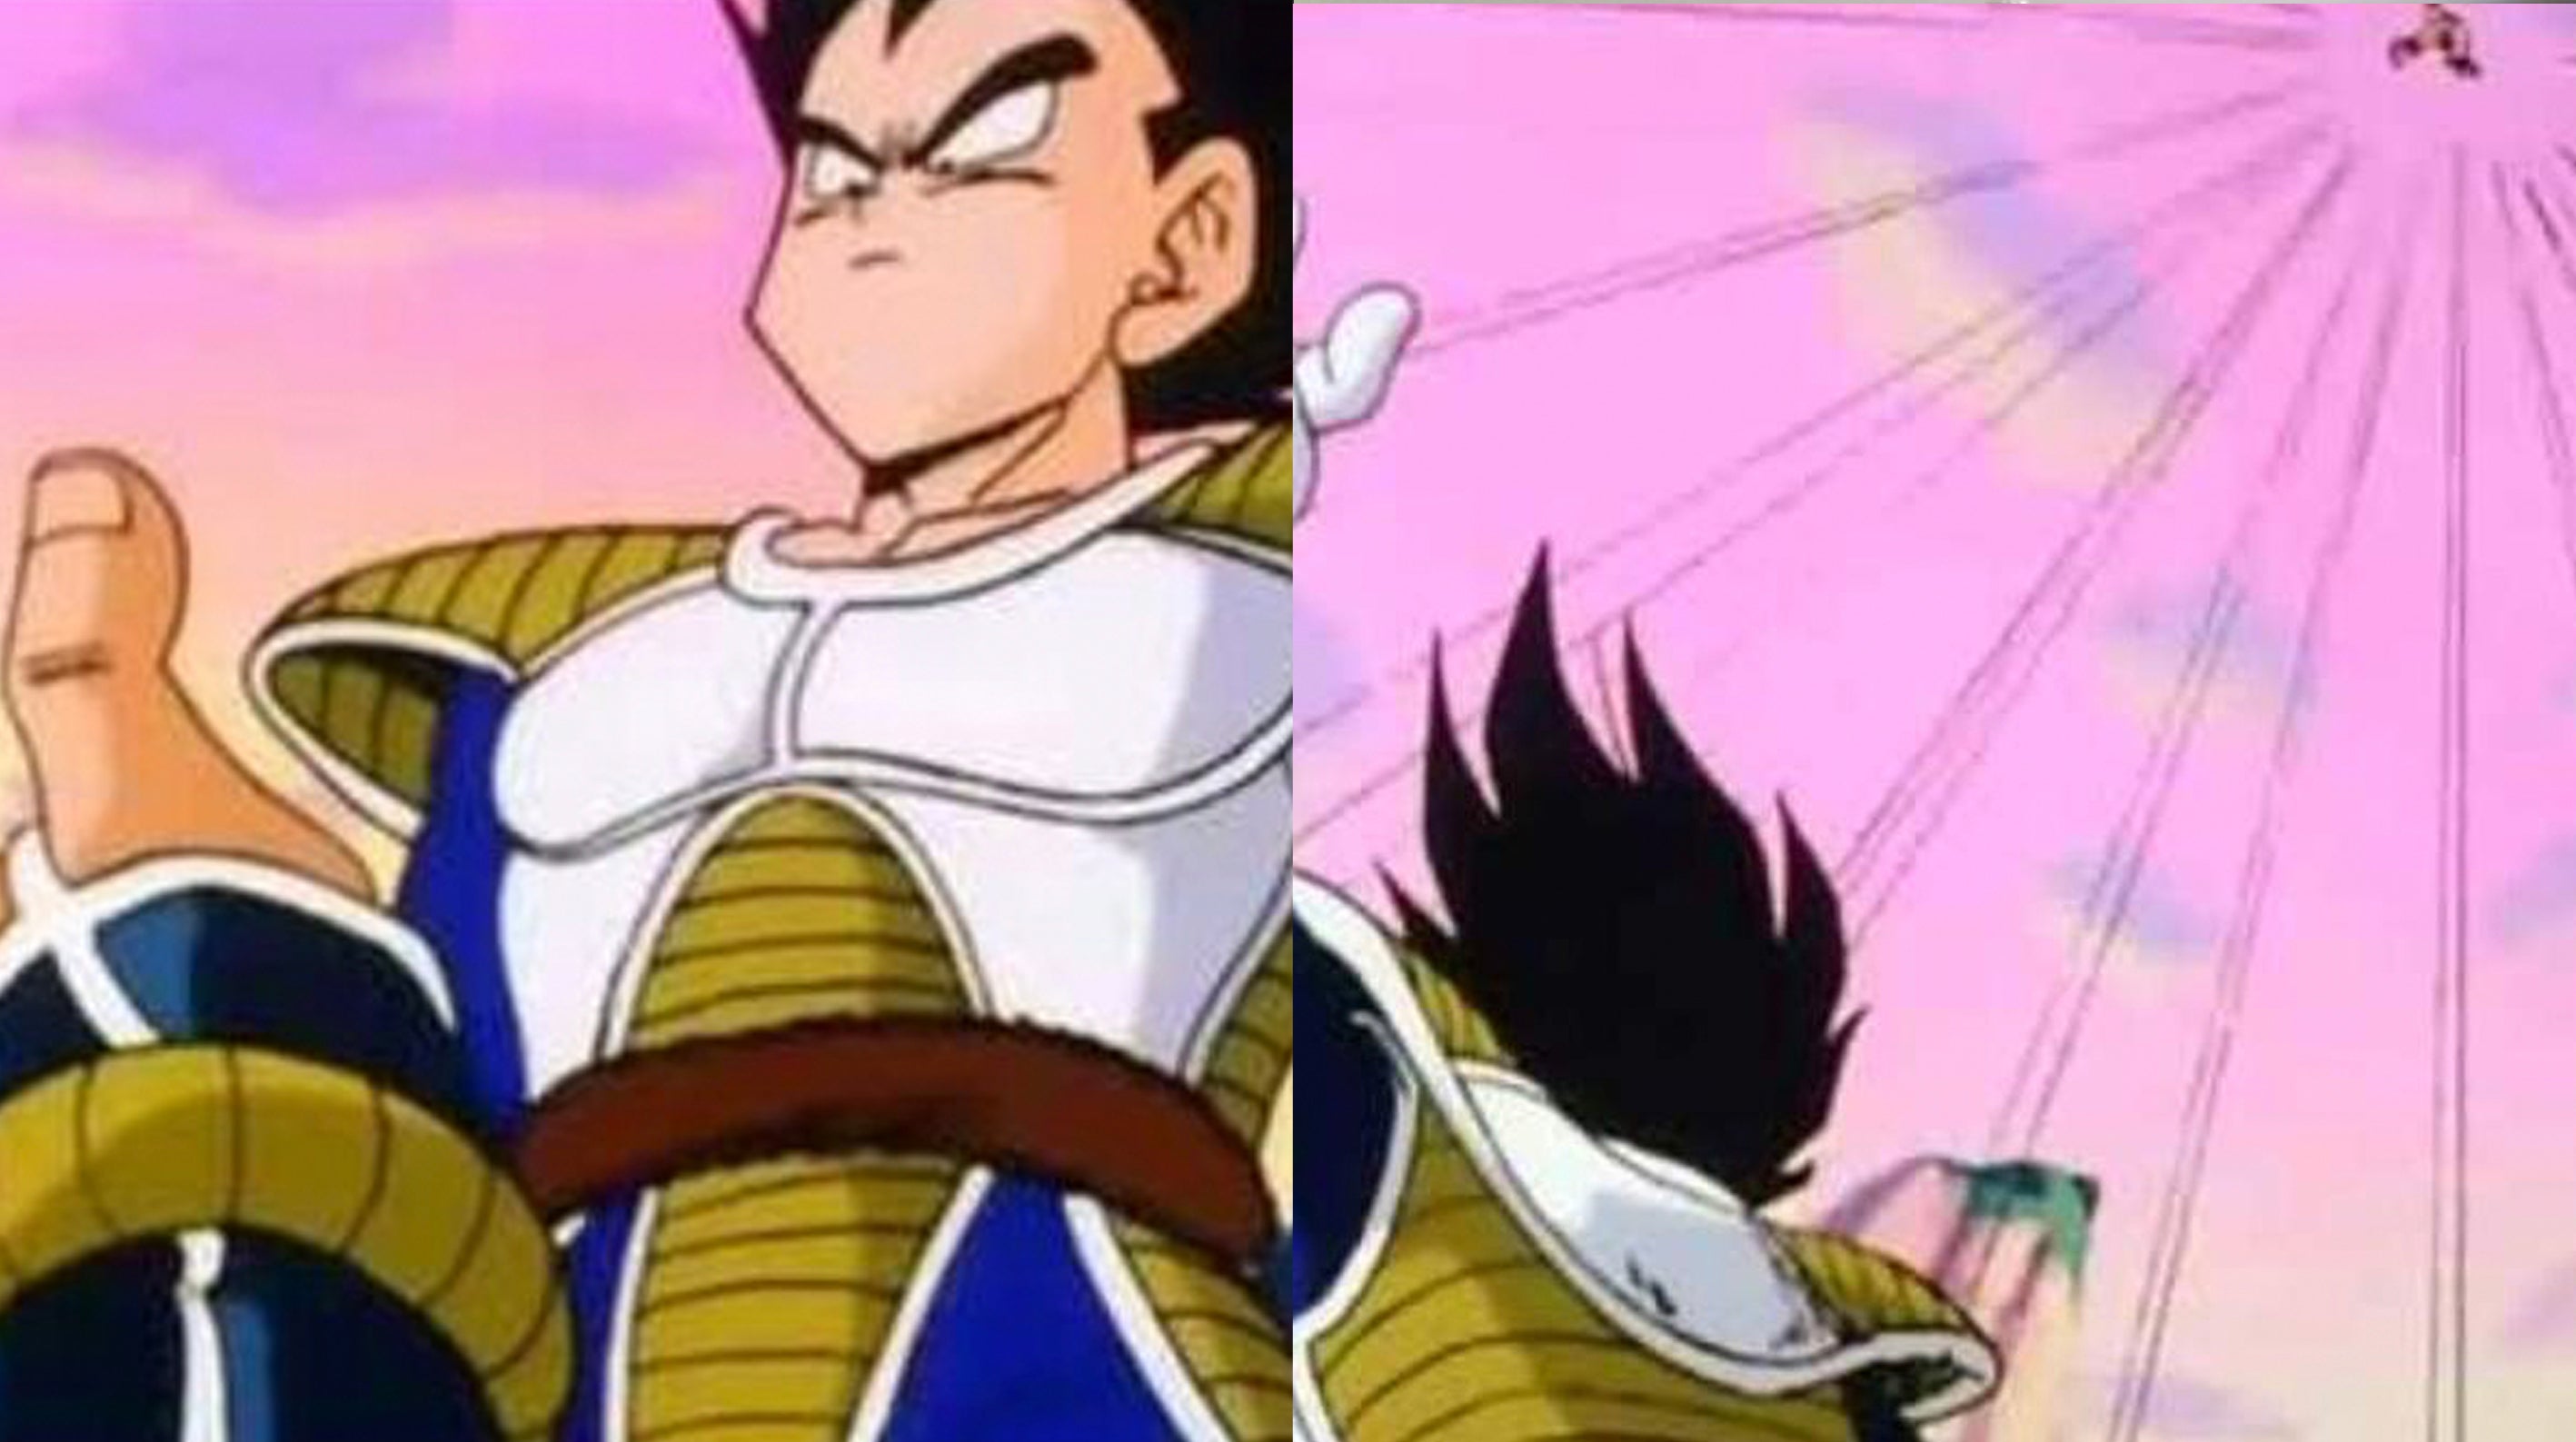 Vegeta throwing Nappa in the sky is an amazing display of relative strength